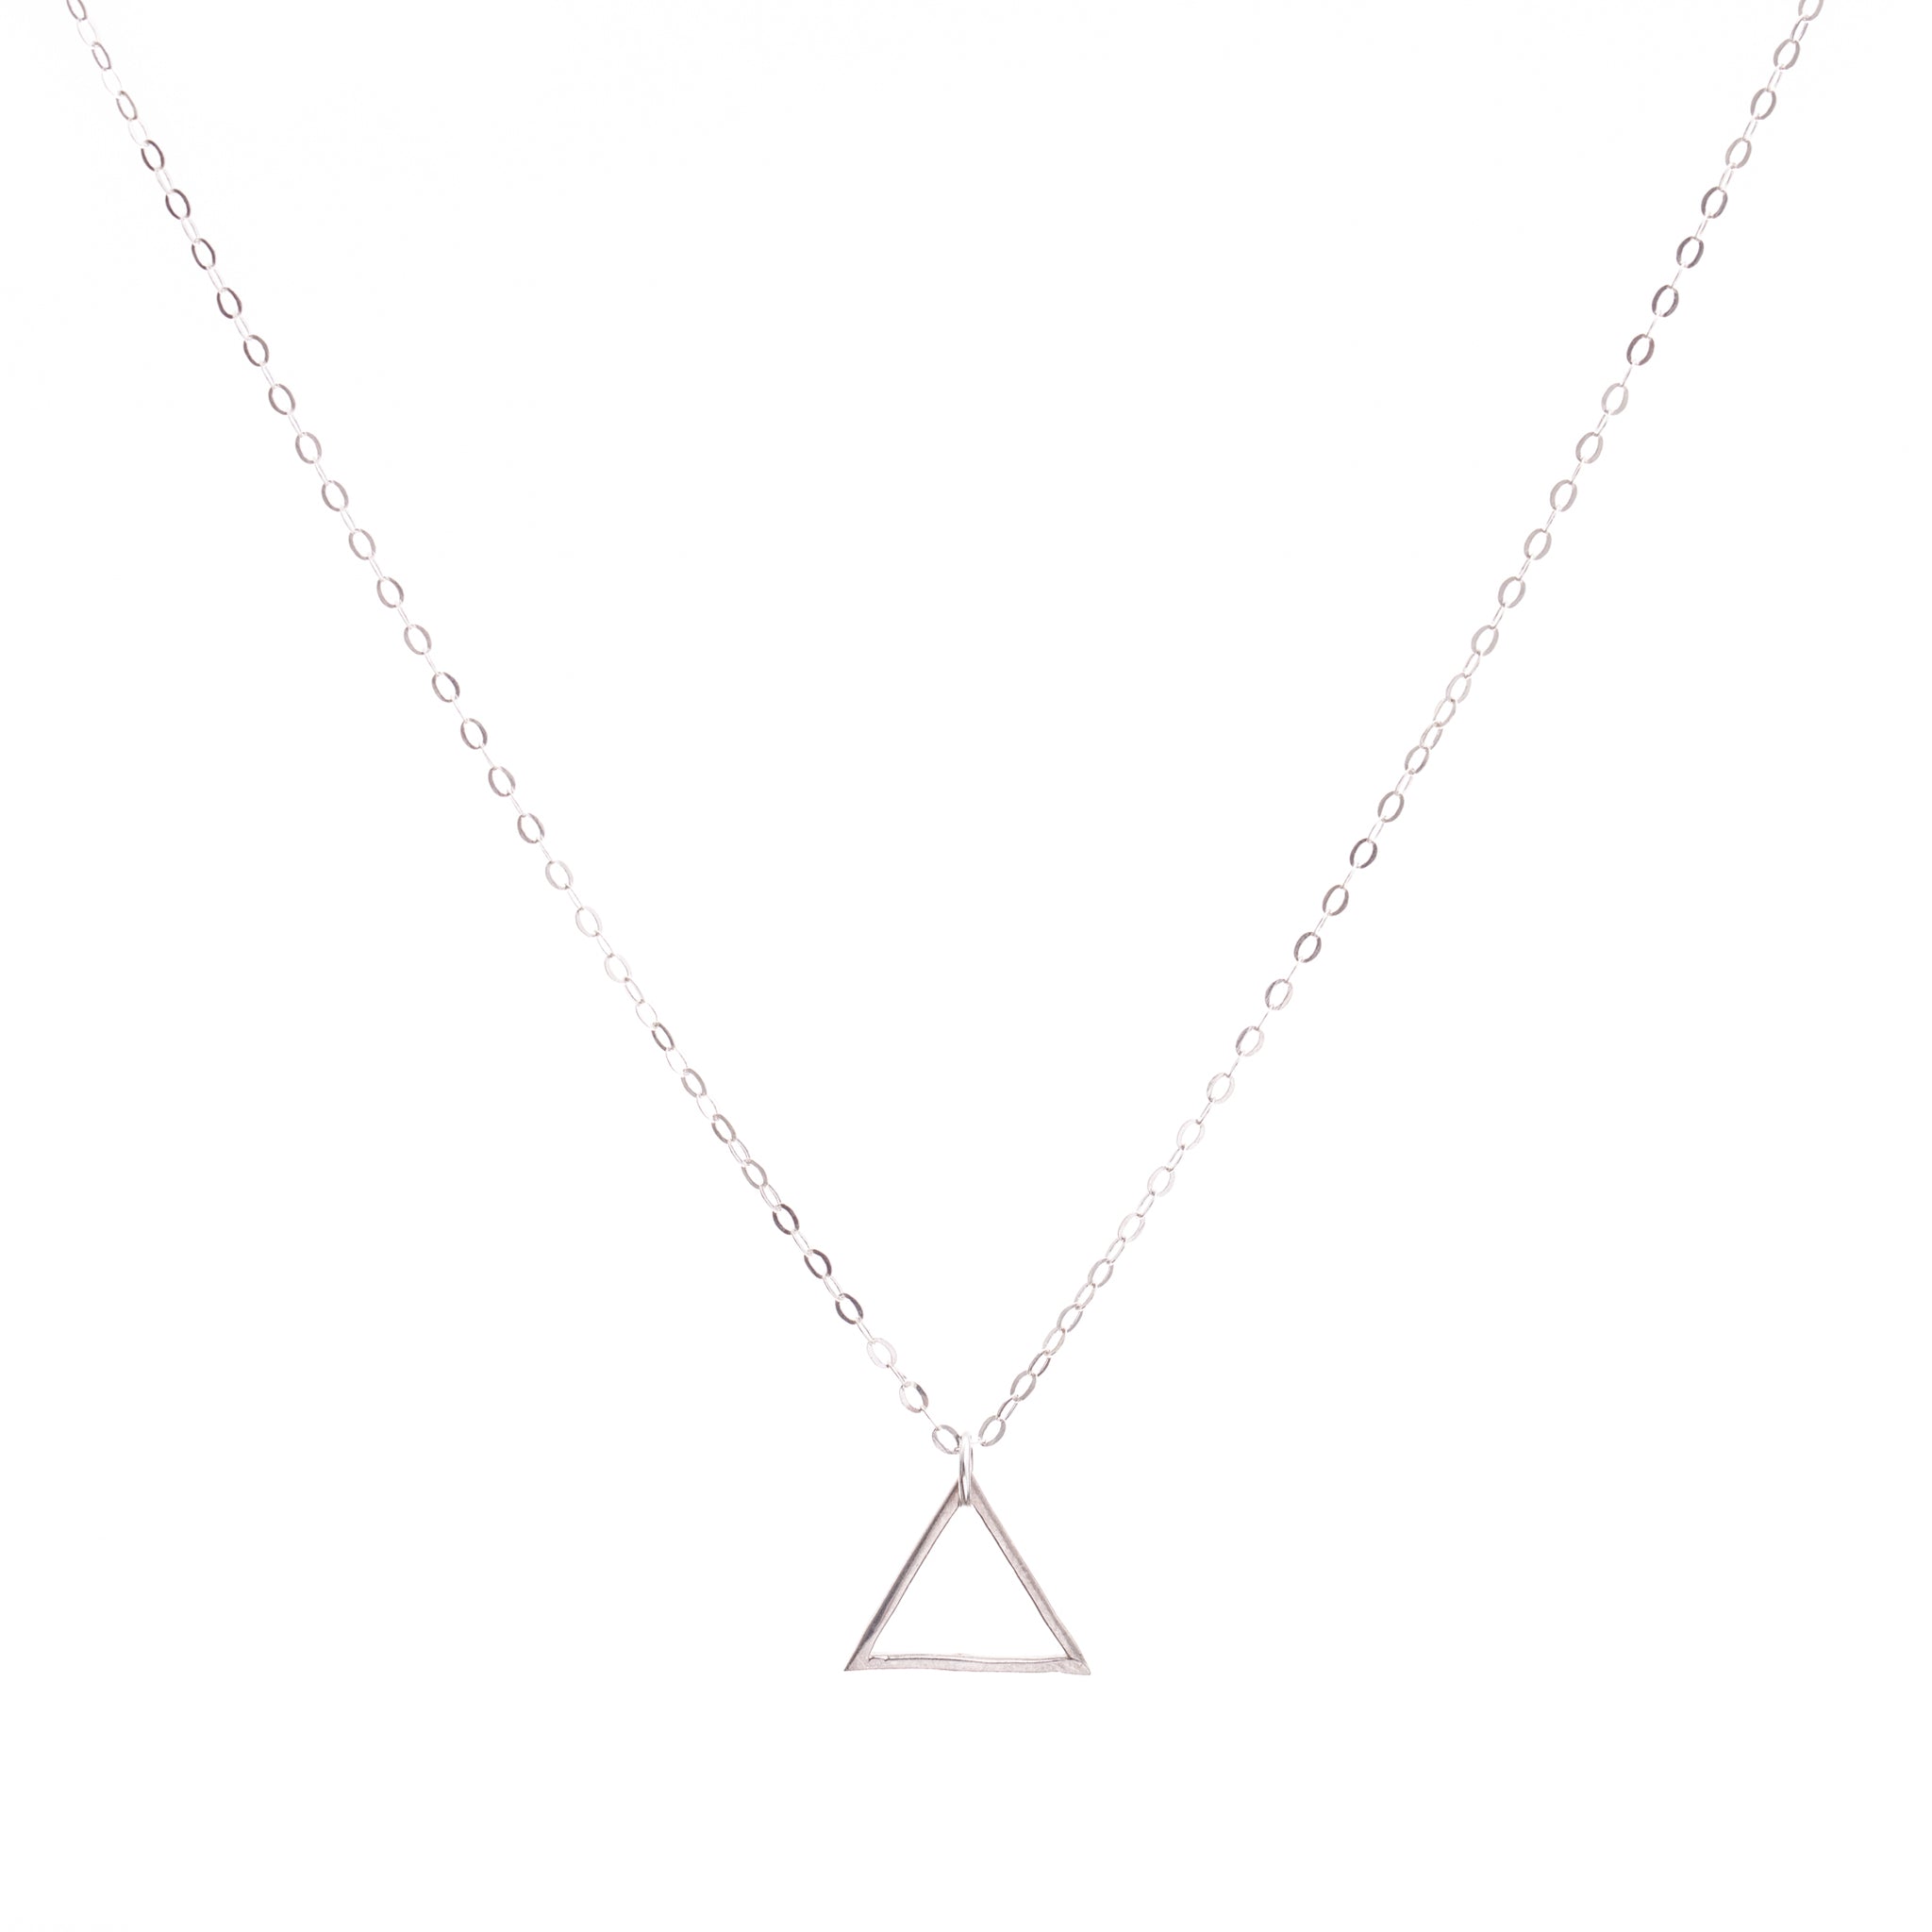 Silver Triangle Necklace – Oh My Clumsy Heart